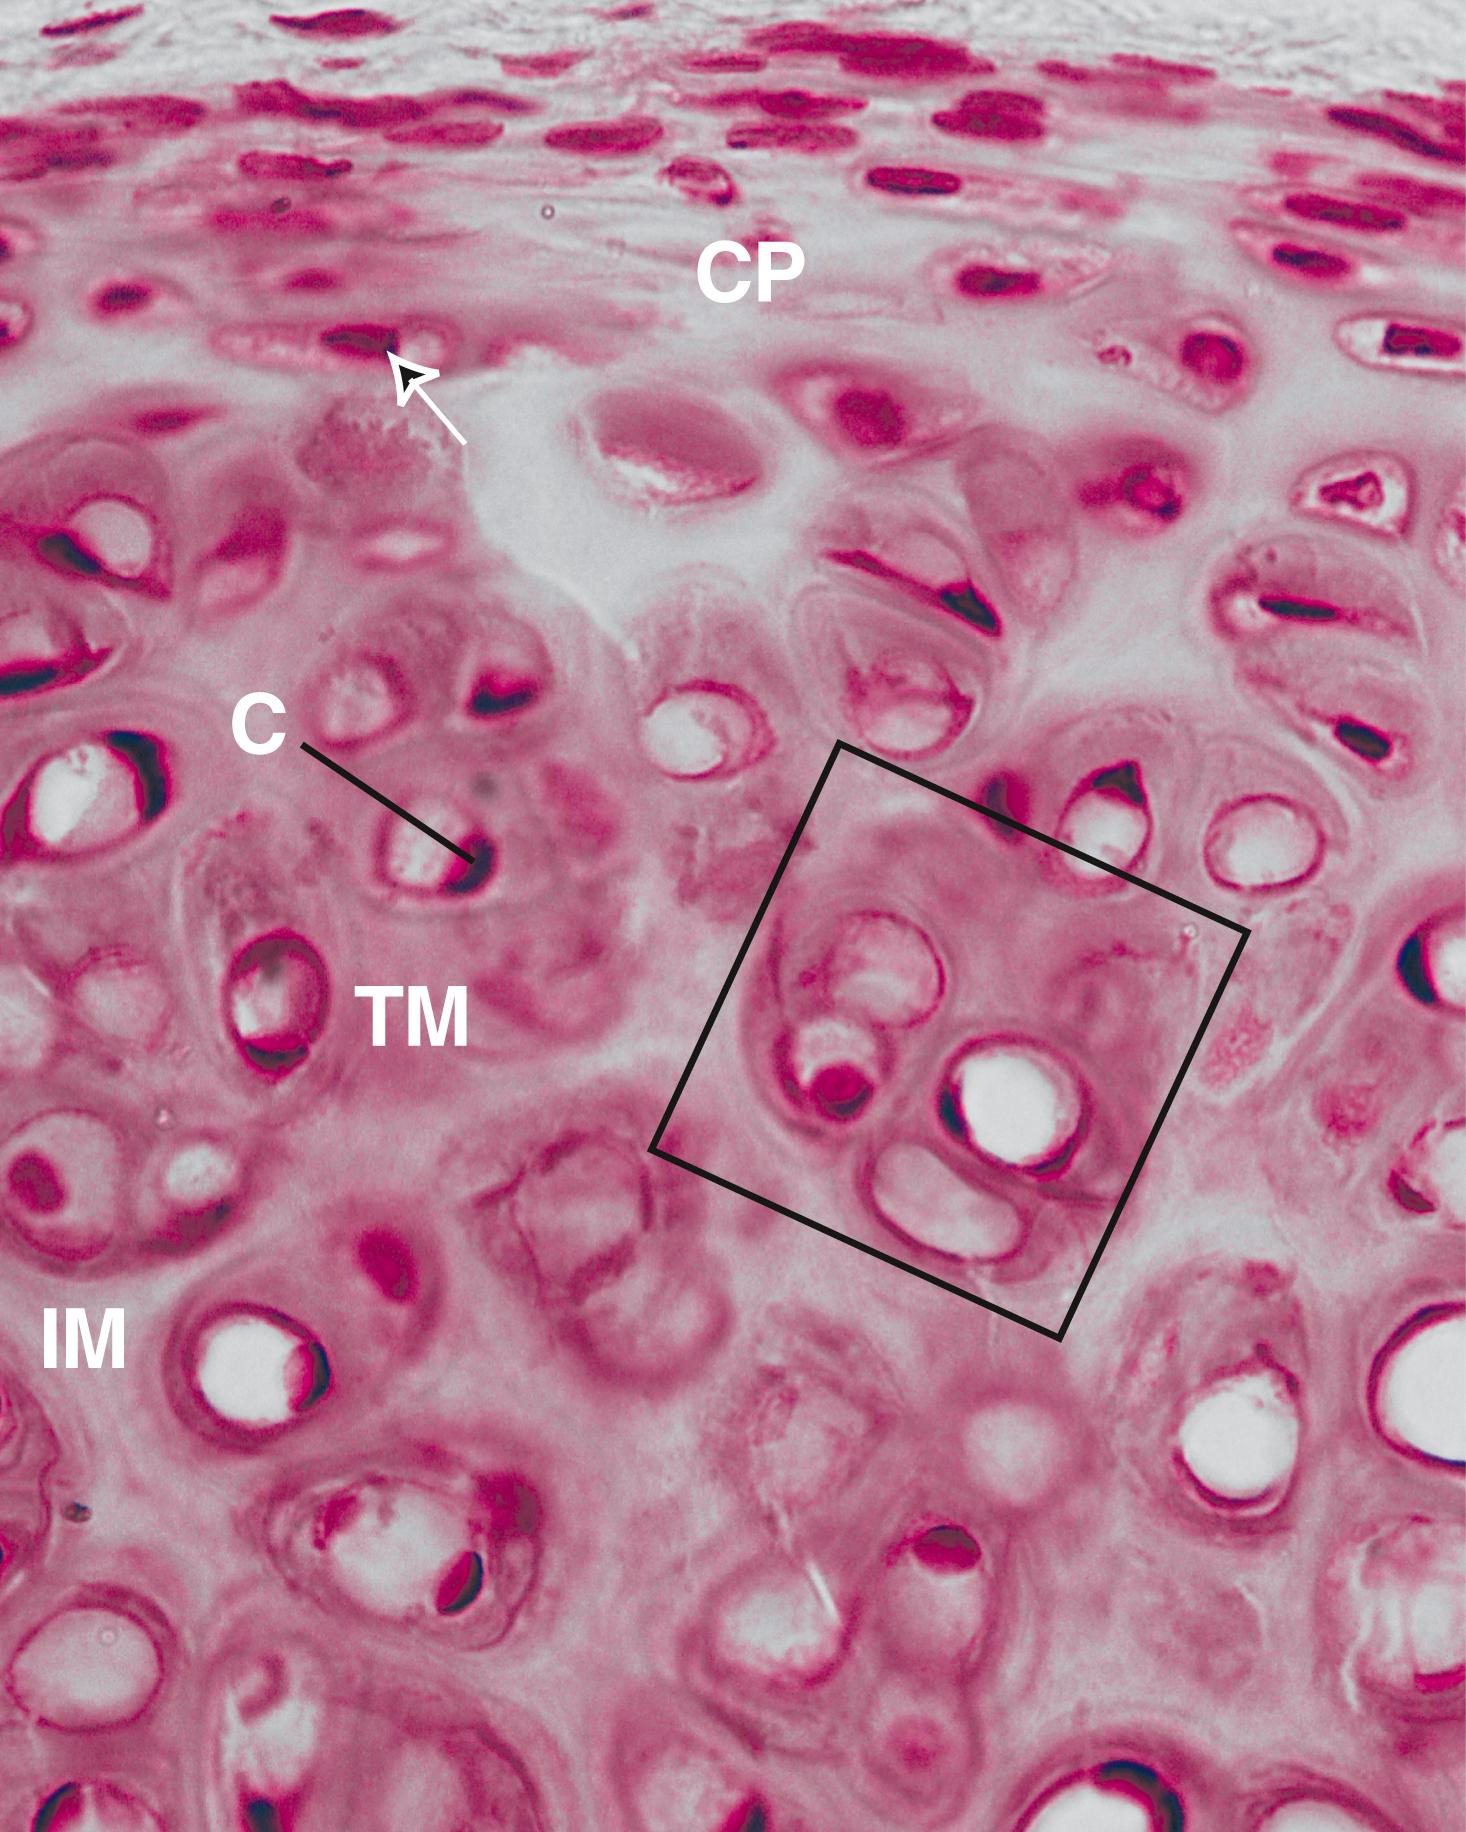 Fig. 7.4, High-magnification light micrograph of hyaline cartilage. Observe the cellular perichondrium (CP) housing chondrogenic cells and chondroblasts (arrow) . Note the nuclei of chondrocytes (C) in their lacunae. This cartilage is growing larger, as is evident by the presence of cell nests (boxed area) . The darker territorial matrix (TM) is clearly distinguishable from the lighter interterritorial matrix (IM). The intense red line at the circumference of each lacuna is the pericellular capsule. (×540)